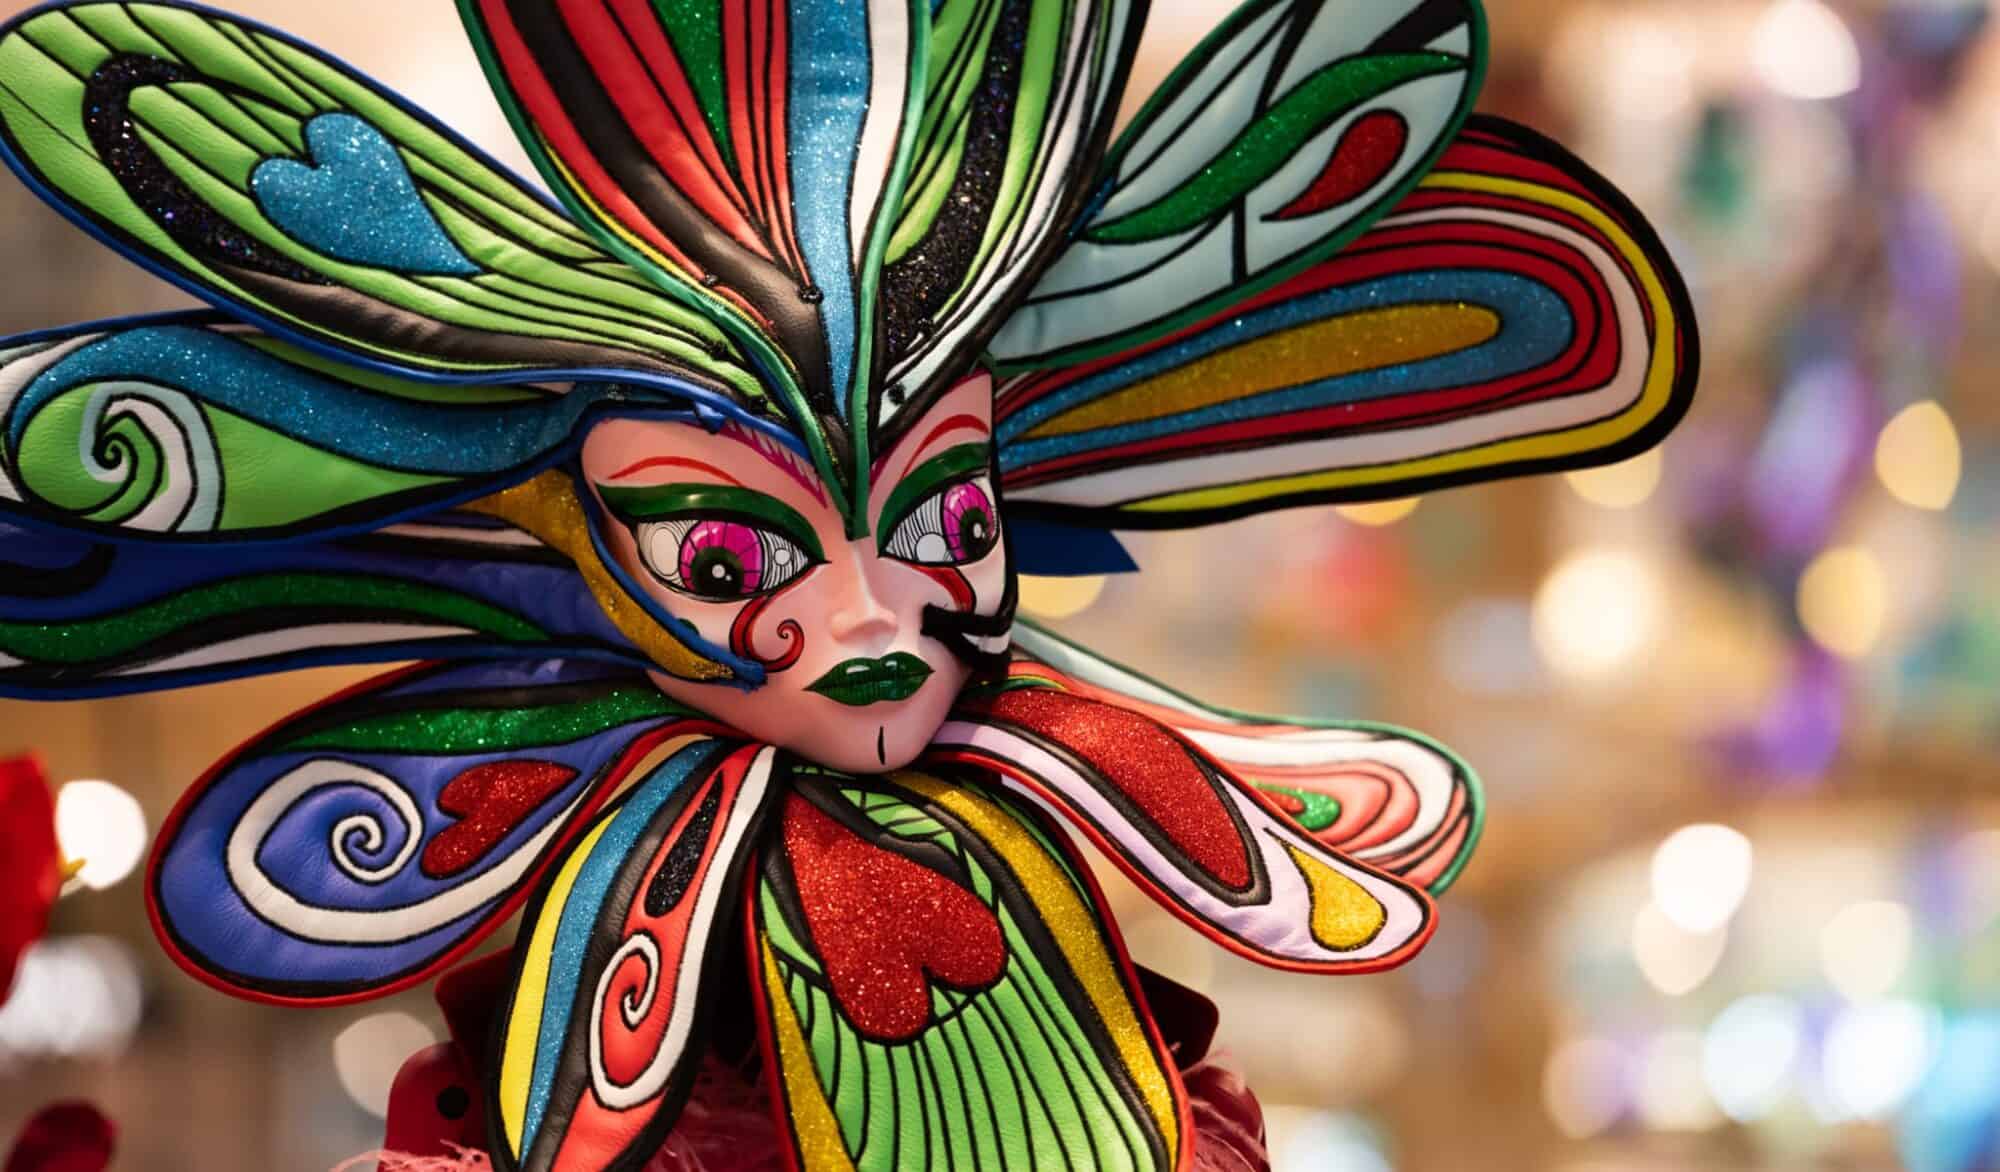 One of the ornaments - a colorful mask remincent of comic opera, from Galeries Lafayettes Christmas Display.